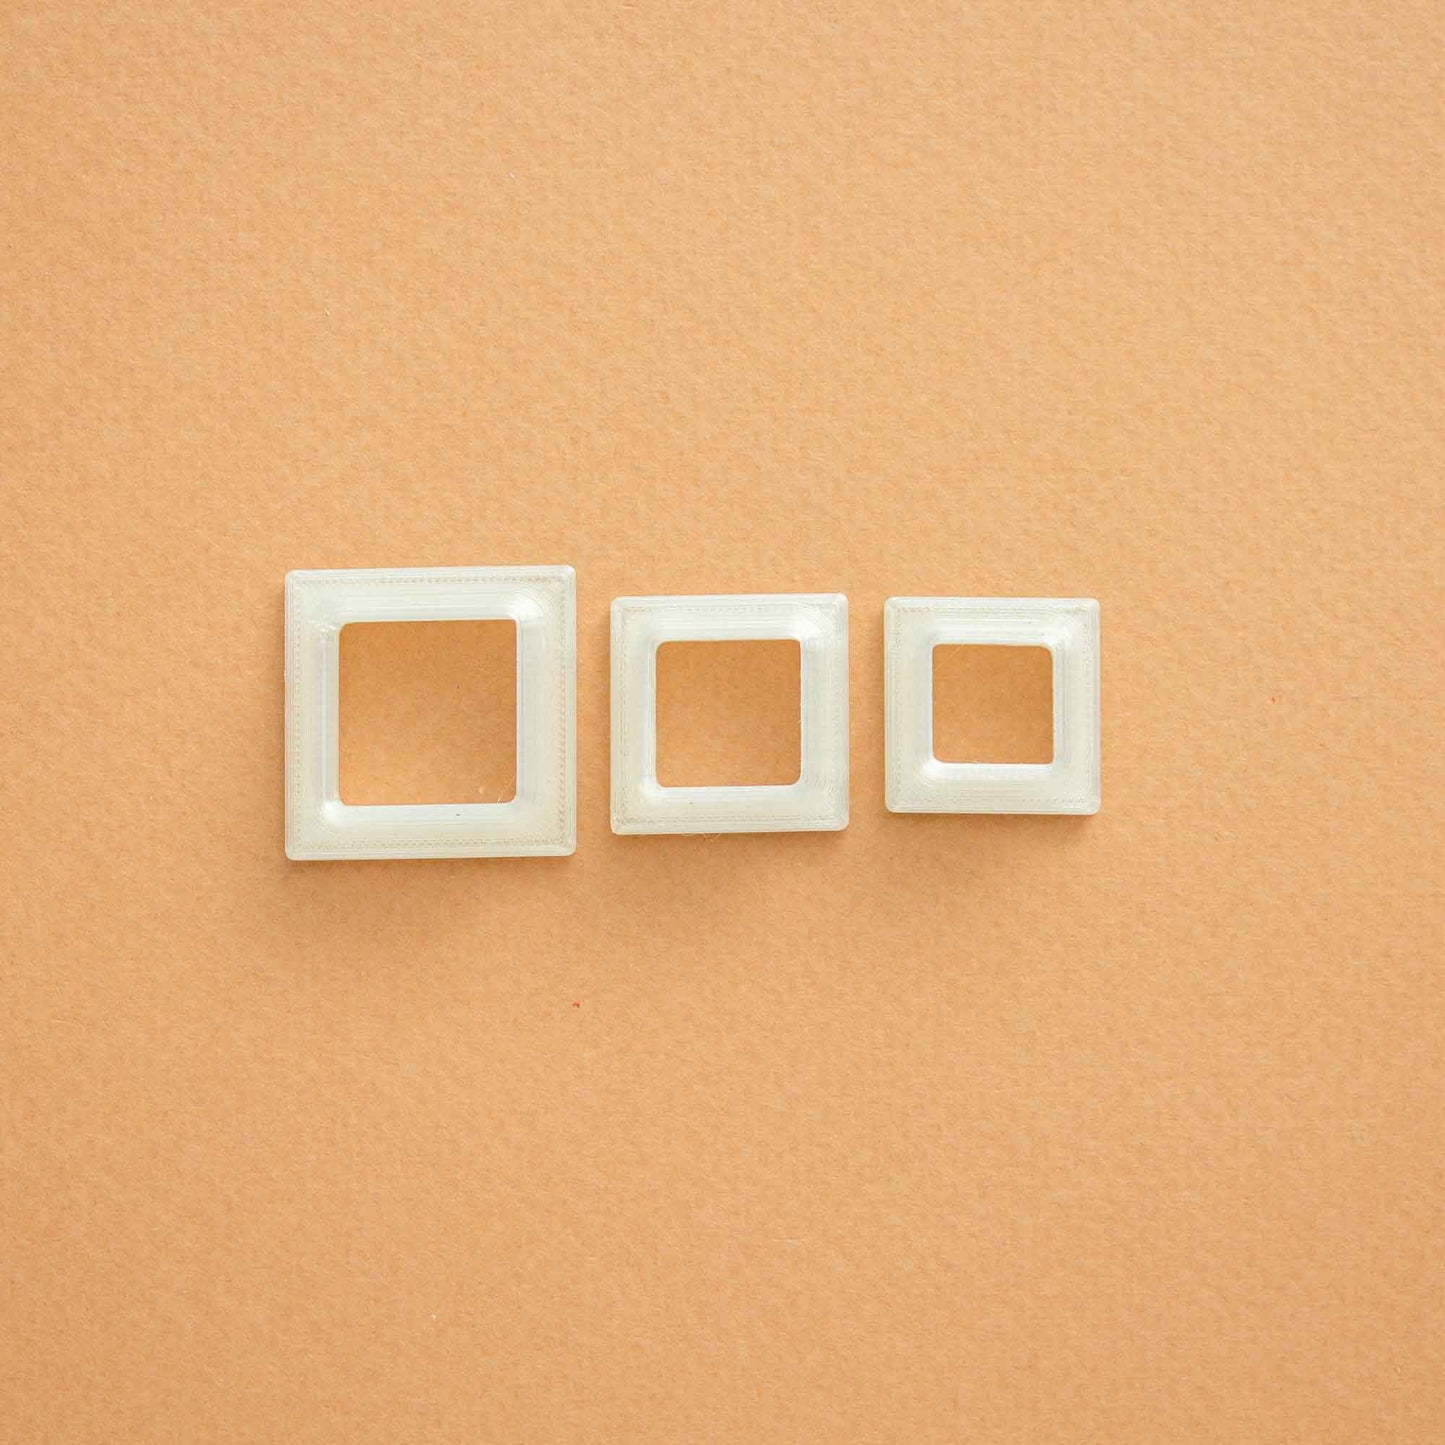 3 small square polymer clay cutters on a light brown background